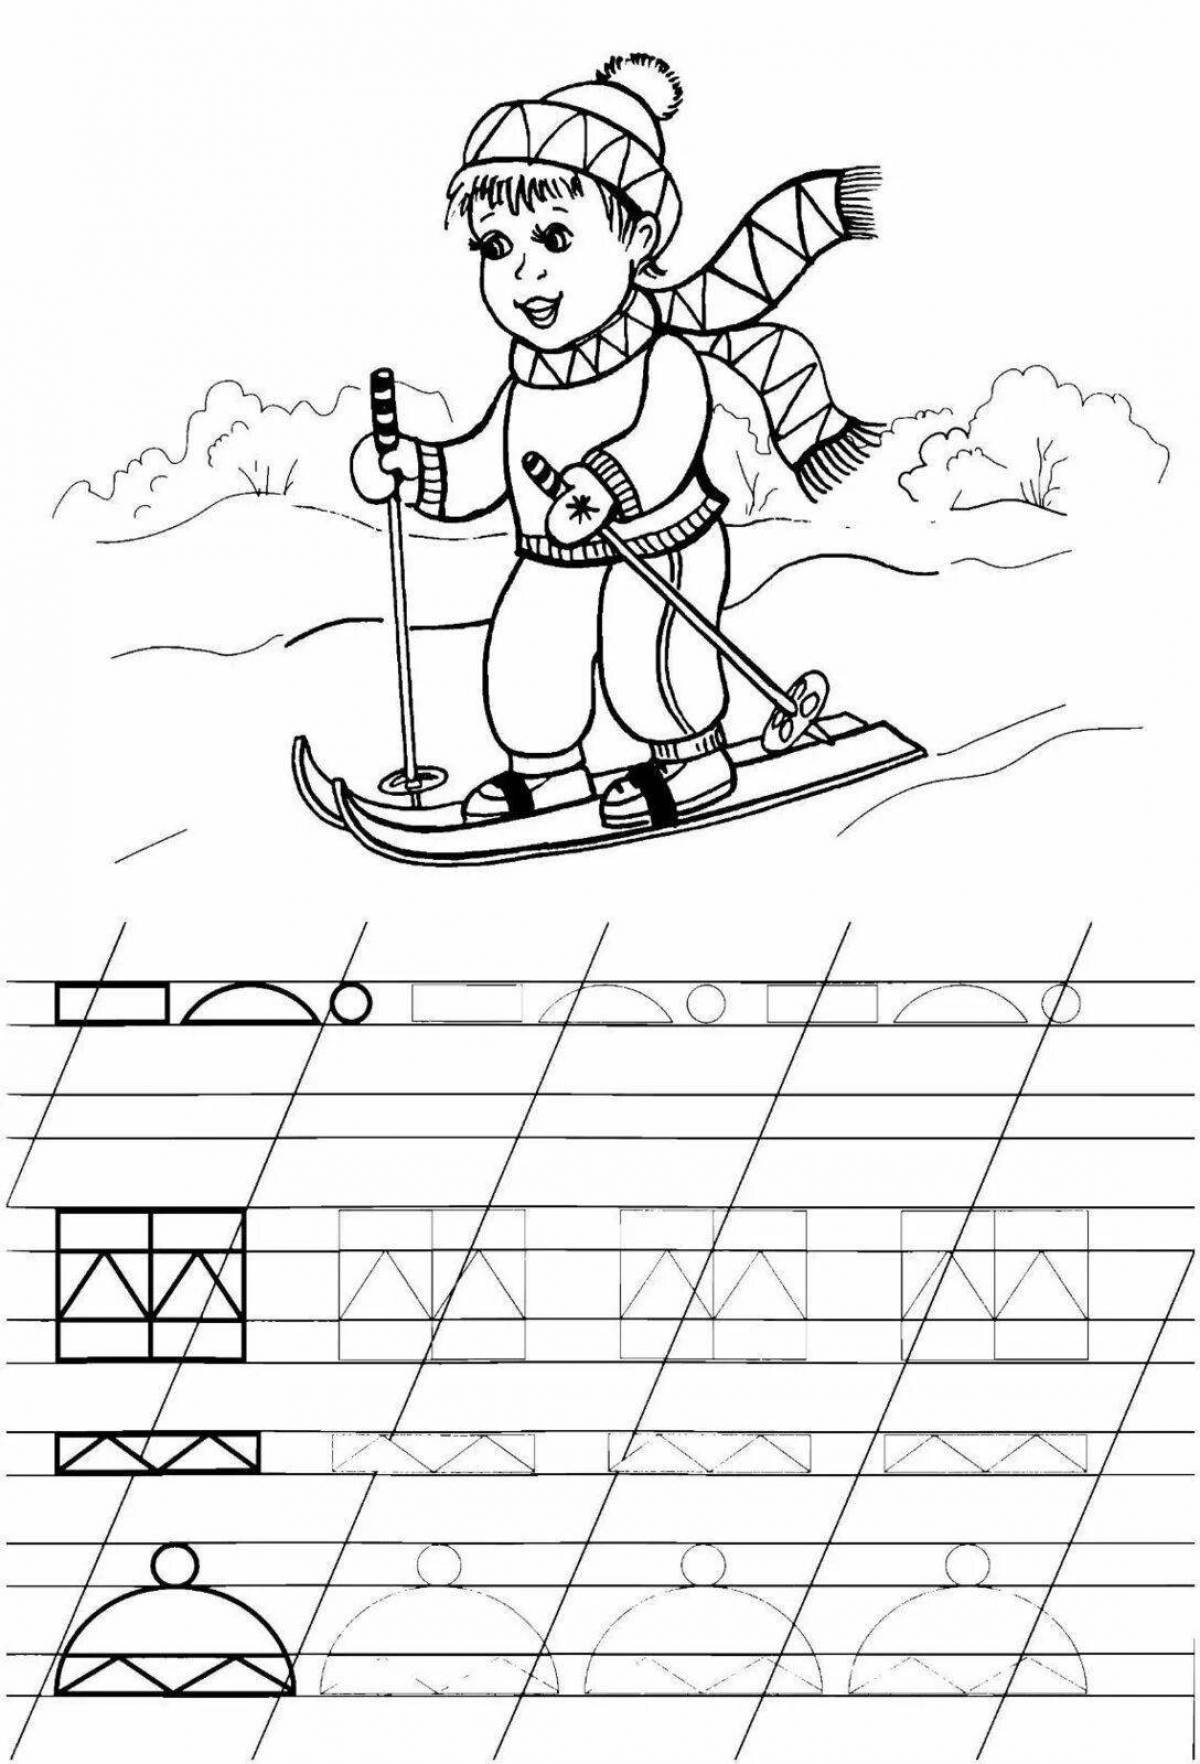 Coloring book funny skier for kids